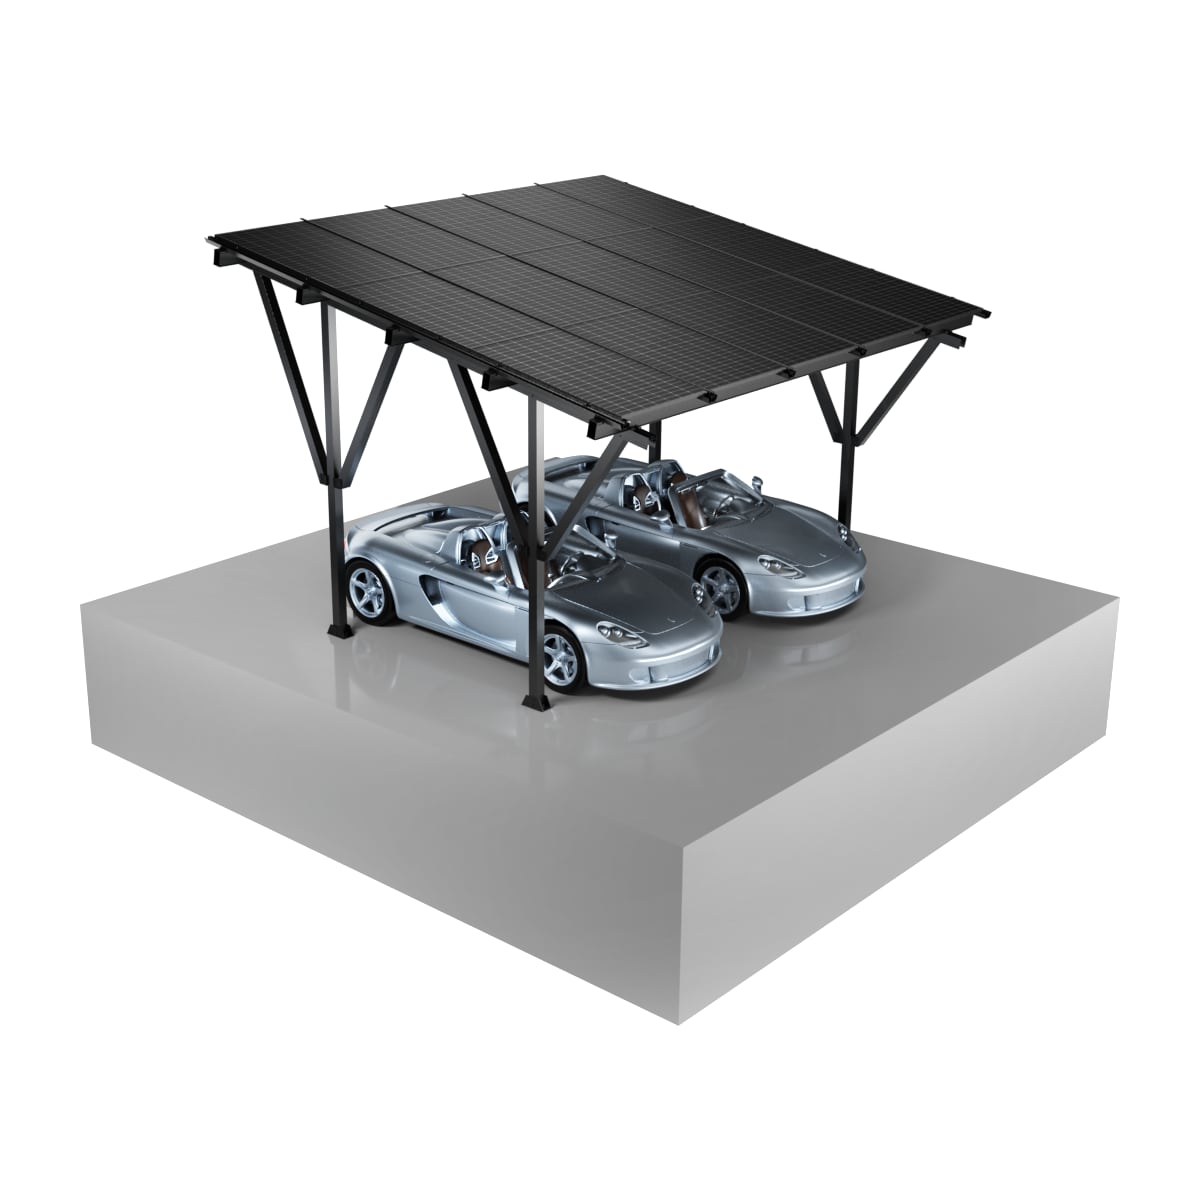 Carport for Two cars